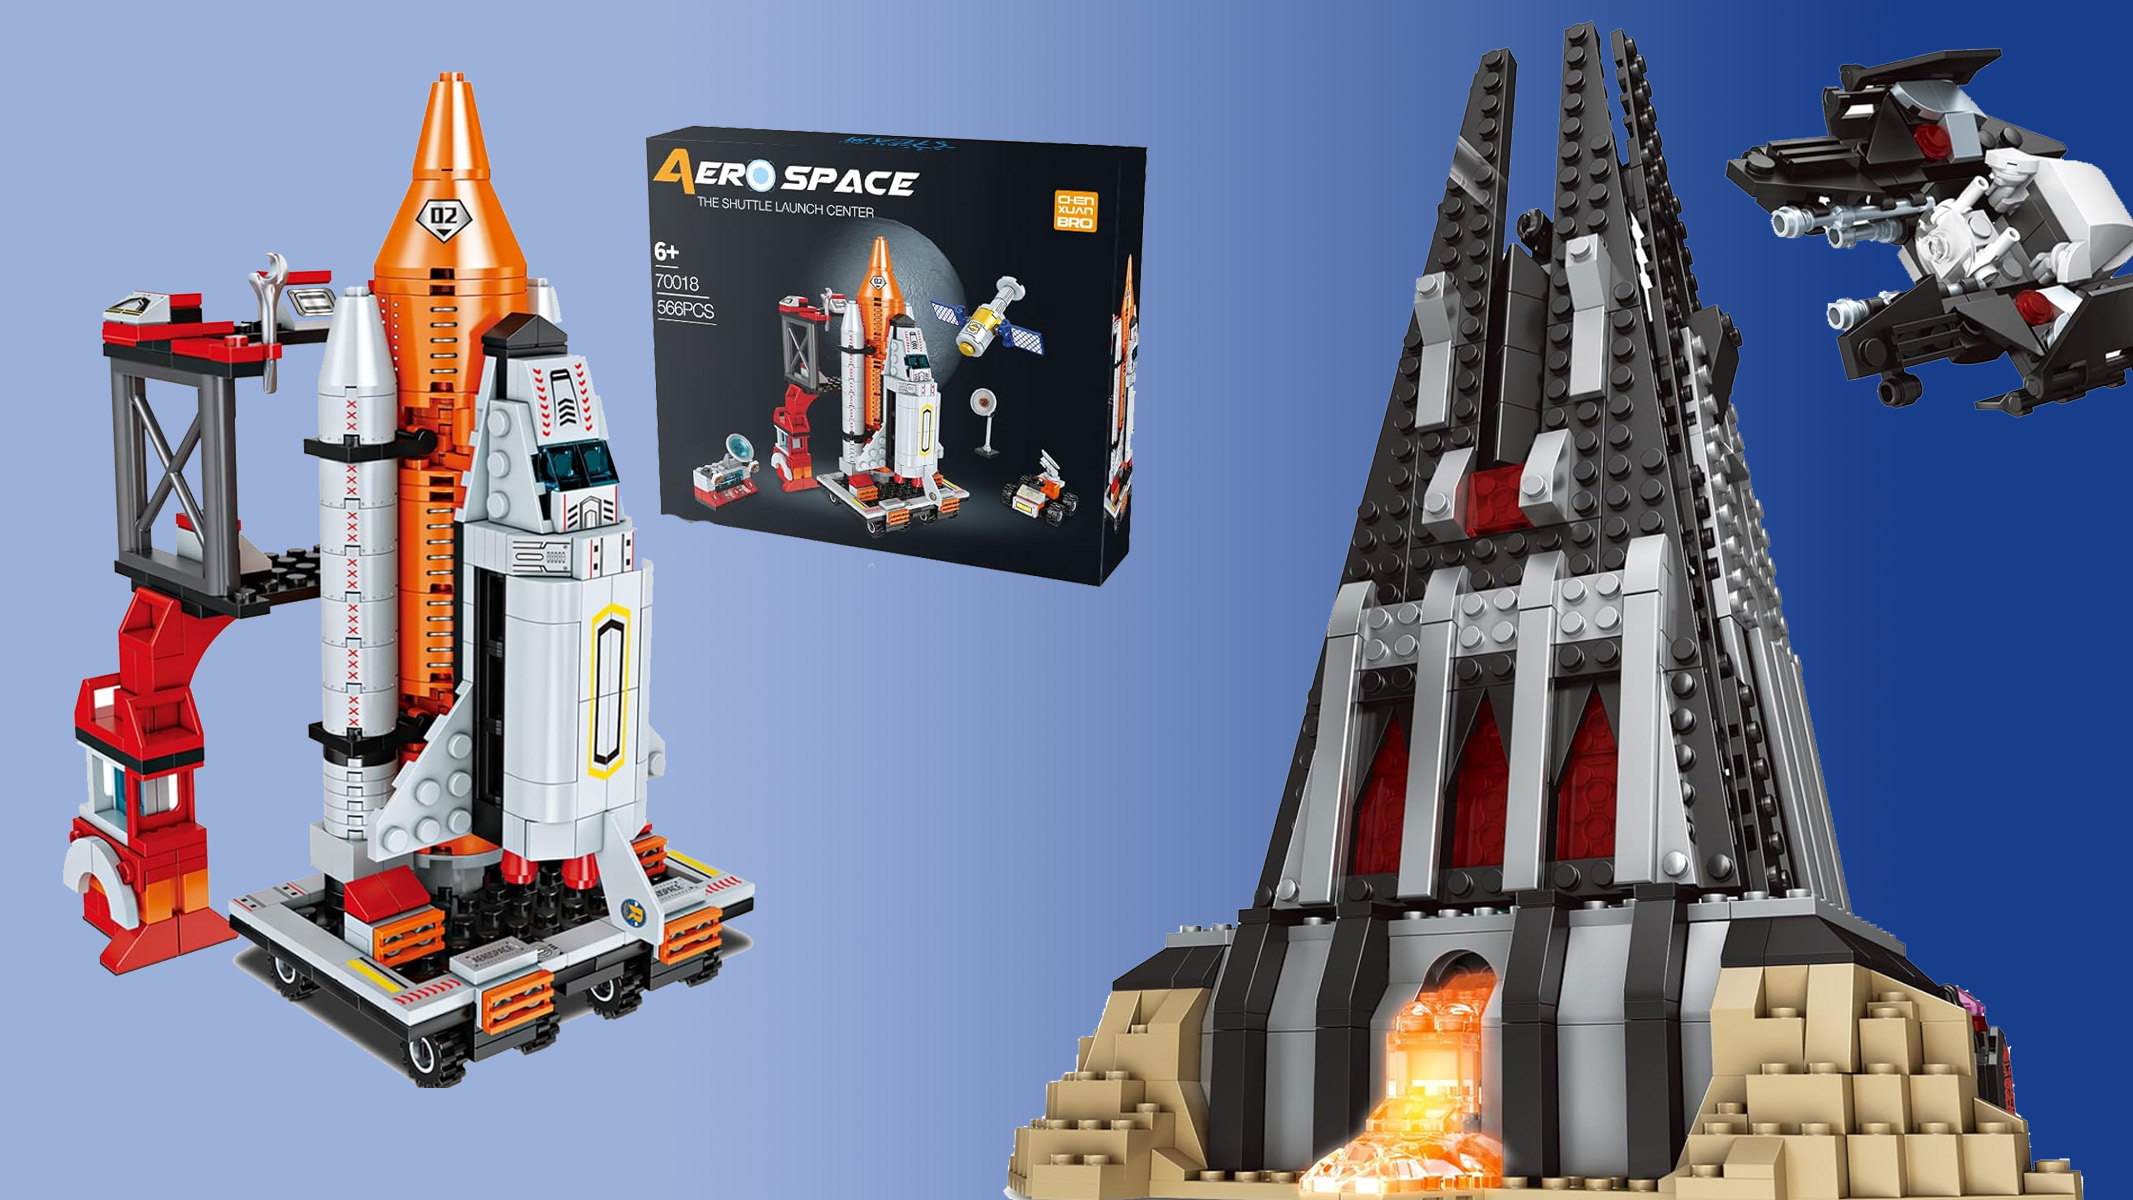 If you’re buying Lego on Amazon this Black Friday weekend, watch out for cheap imitators Space